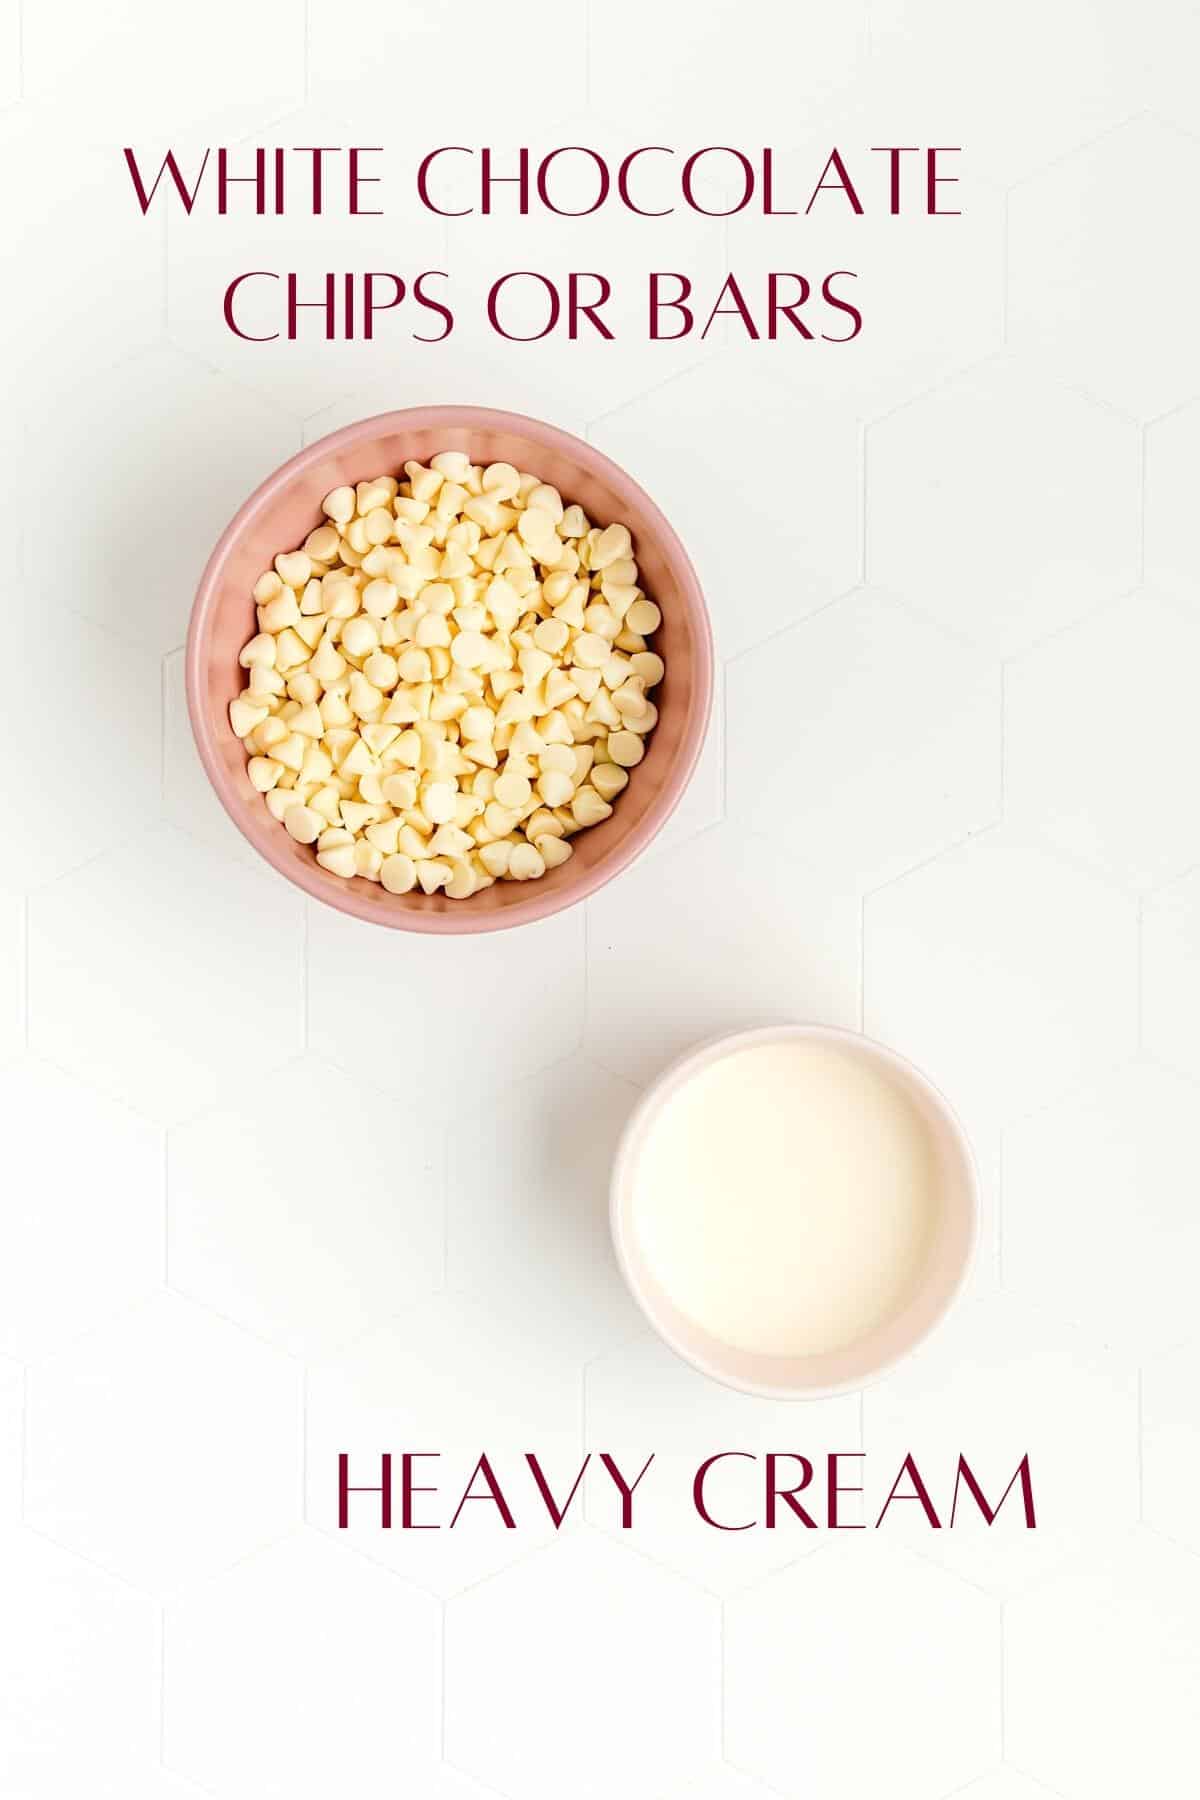 Ingredients for white chocolate sauce in individual bowls on white honeycomb background.